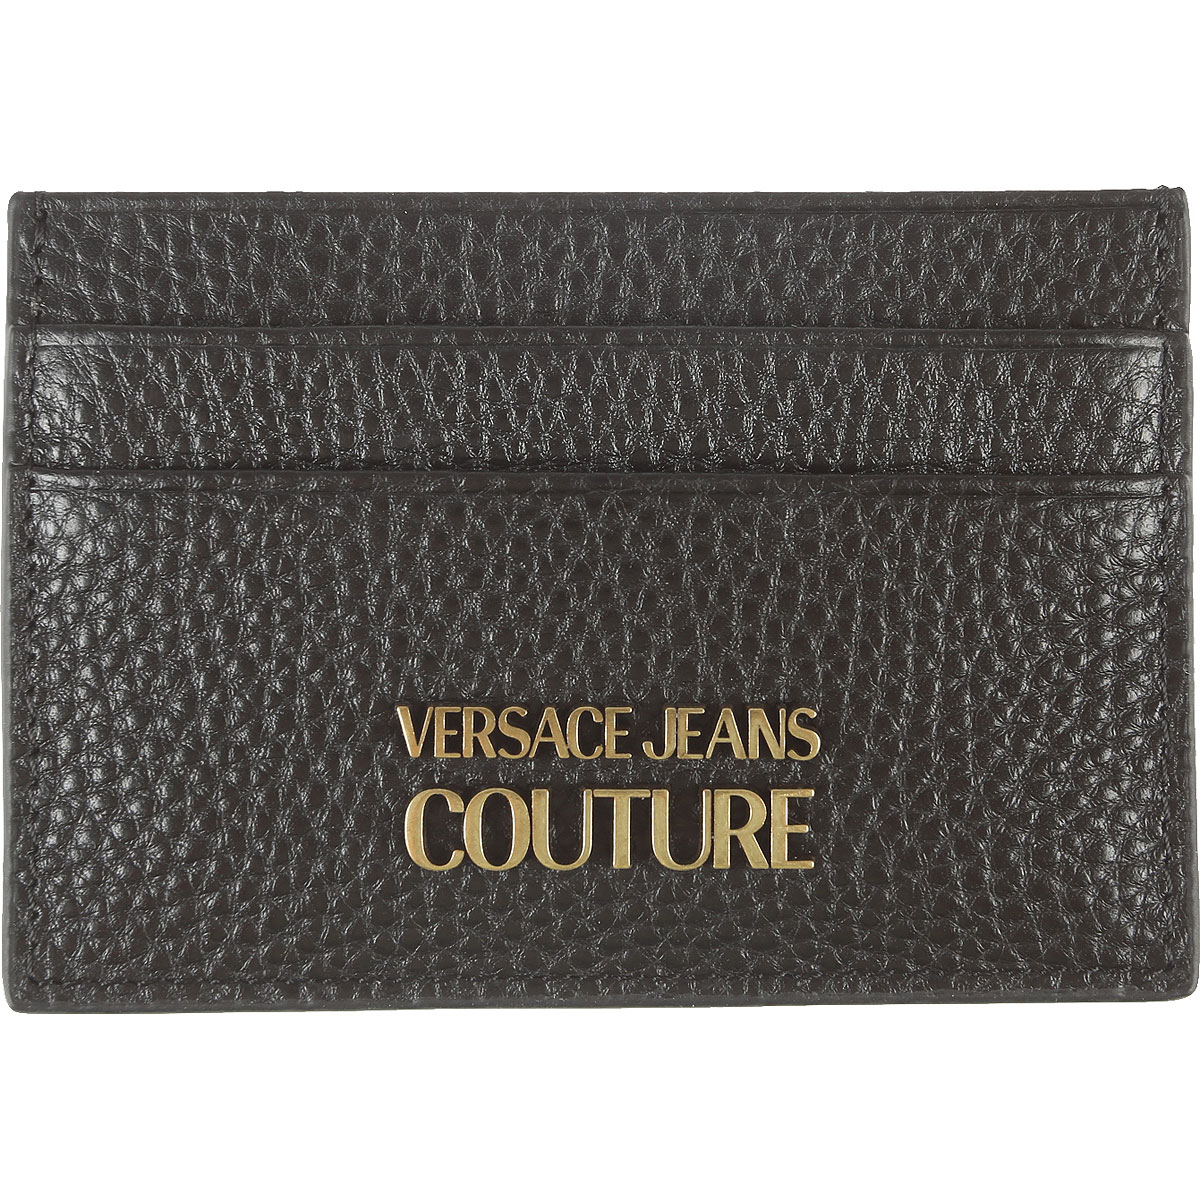 Mens Wallets Versace Jeans Couture , Style code: 73ya5px2-zp114-899